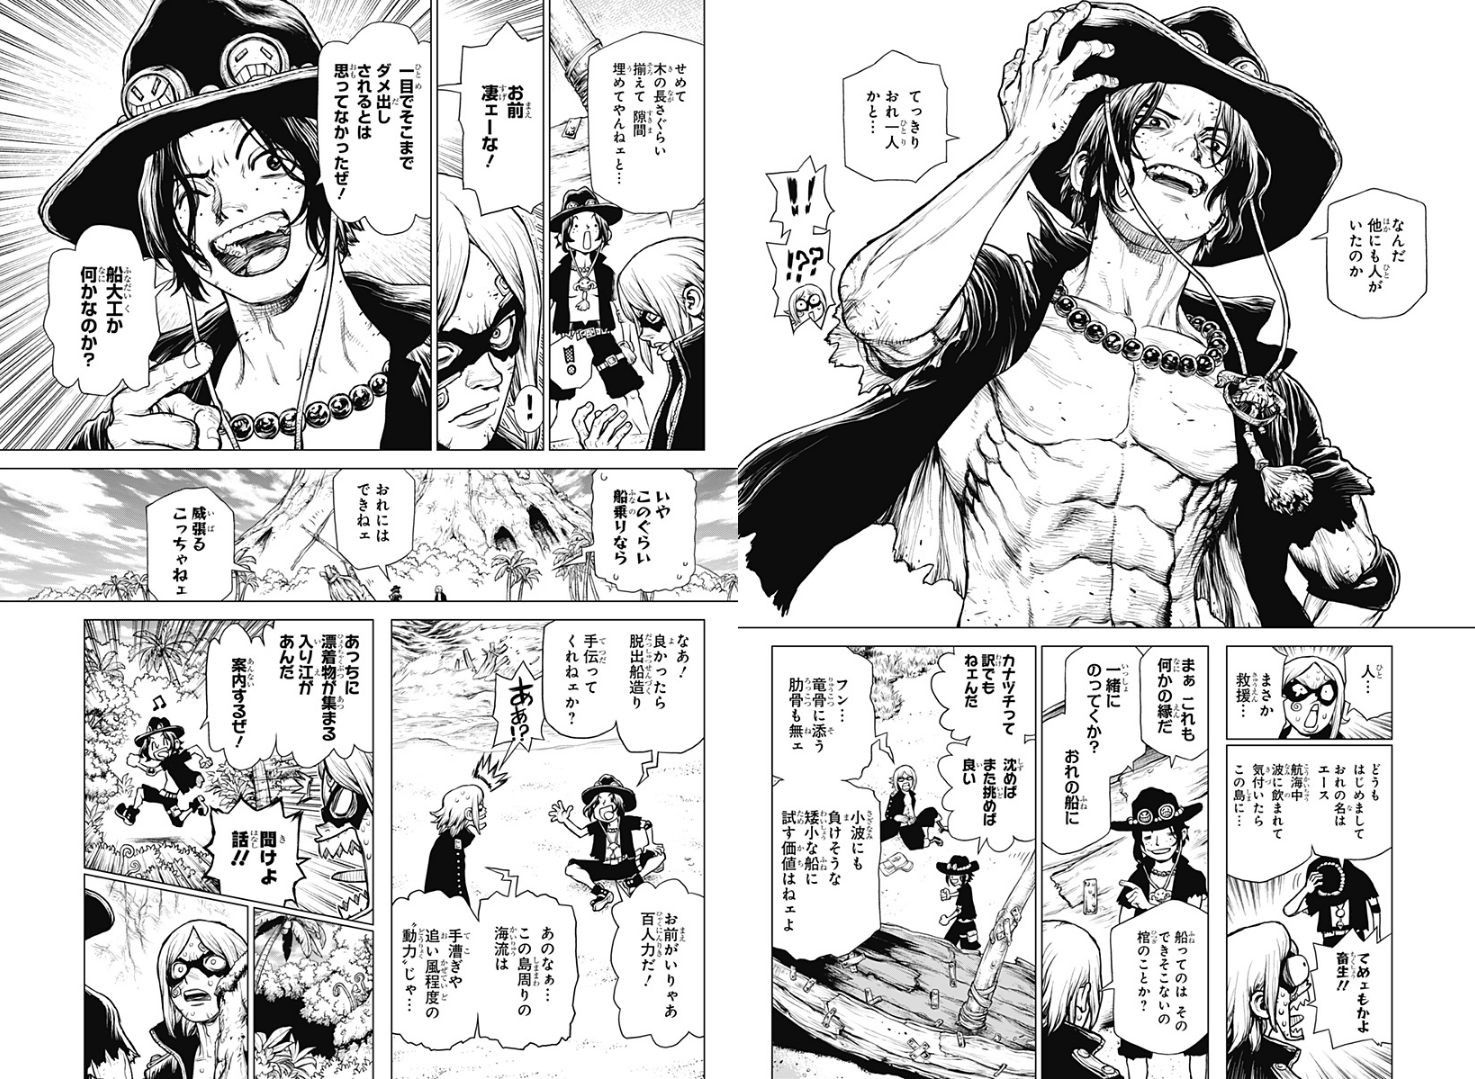 ONE PIECE EPISODE A - TOME 02 - ACE